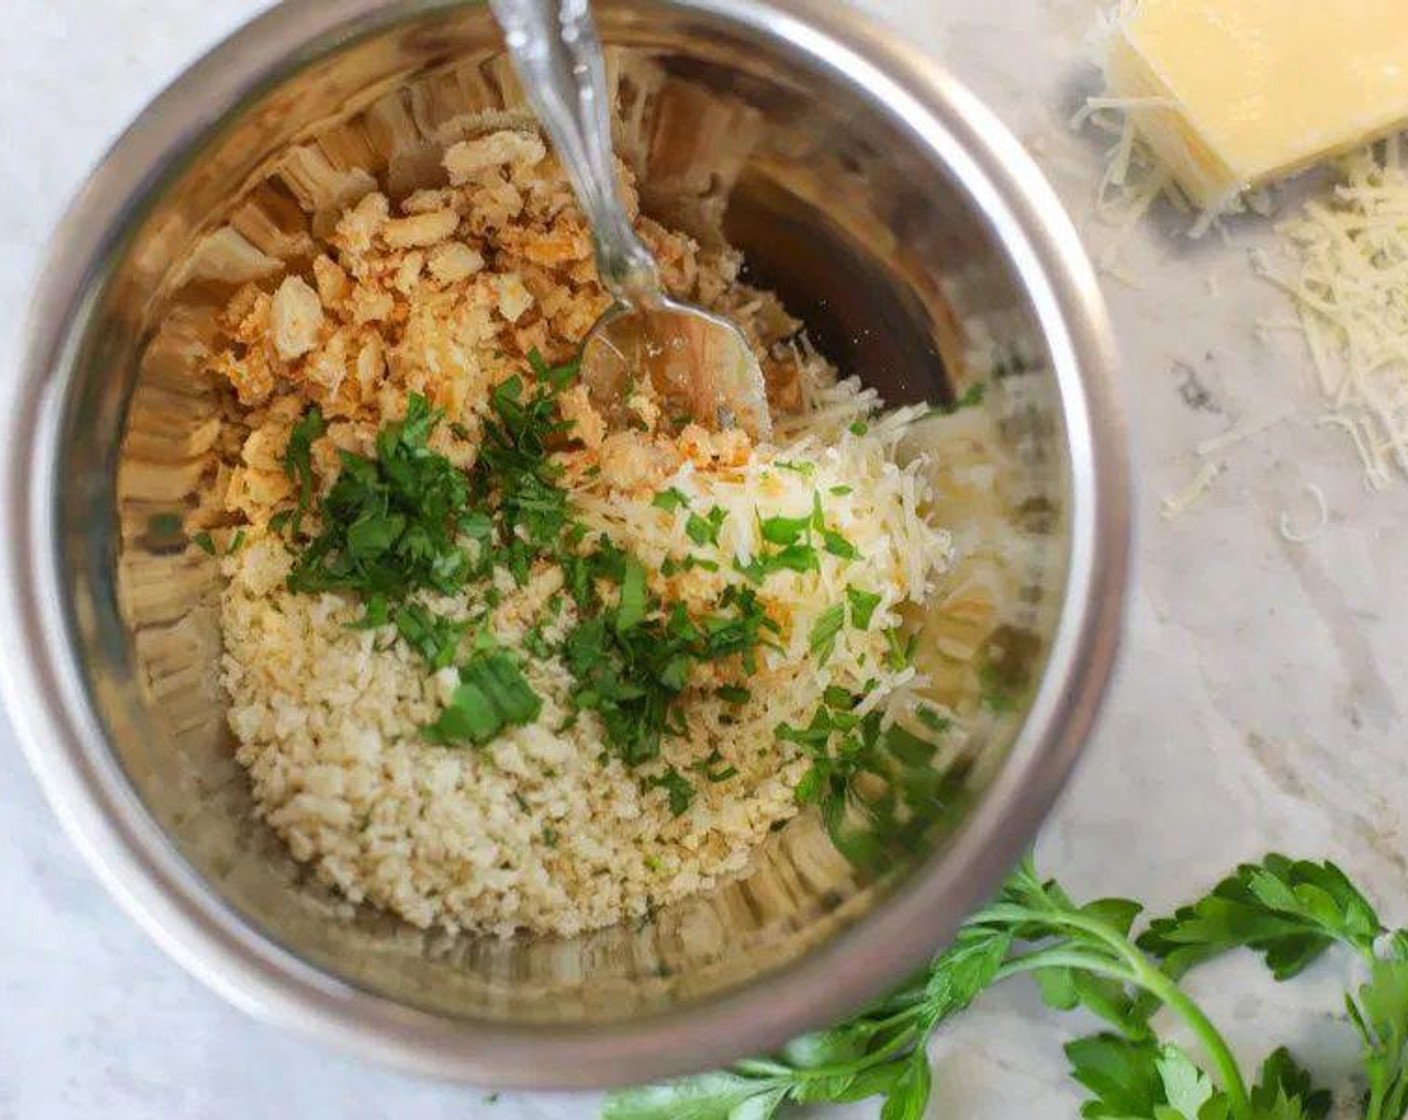 step 3 Meanwhile, prepare the crust topping. In a small bowl, measure out Fried Onions (2/3 cup) and crush into fine pieces with a fork. Add Seasoned Panko Breadcrumbs (2/3 cup), Parmesan Cheese (1/4 cup), and Fresh Parsley (1 tsp) to bowl and mix until combined. Set aside.